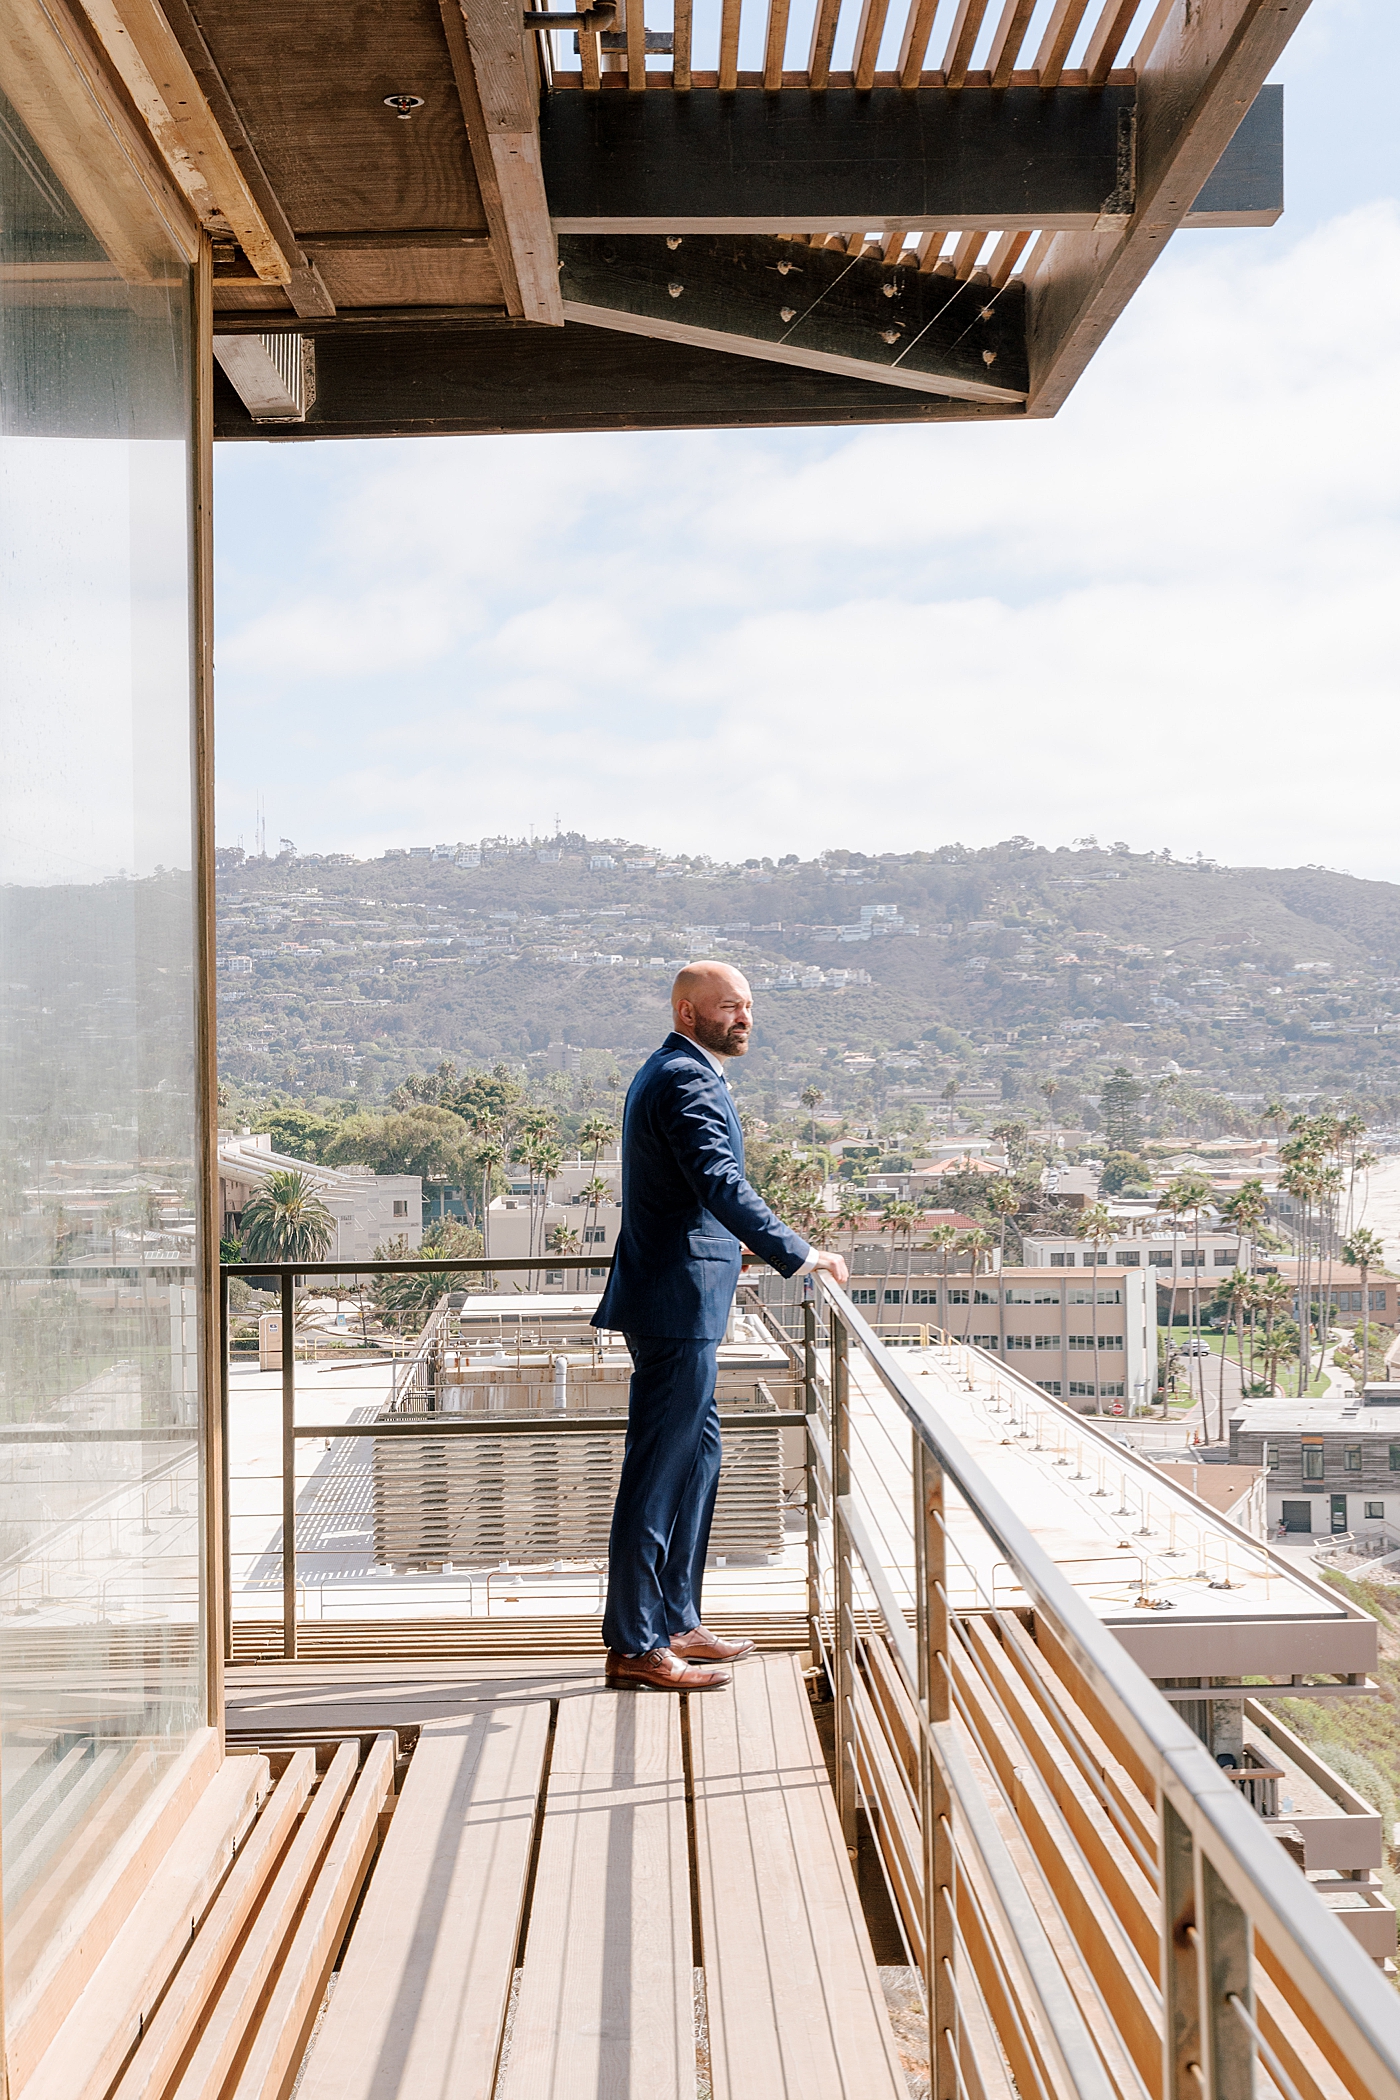 Groom in navy suit standing alone on the balcony looking out on a tropical, sunny city | Image by Hope Helmuth Photography